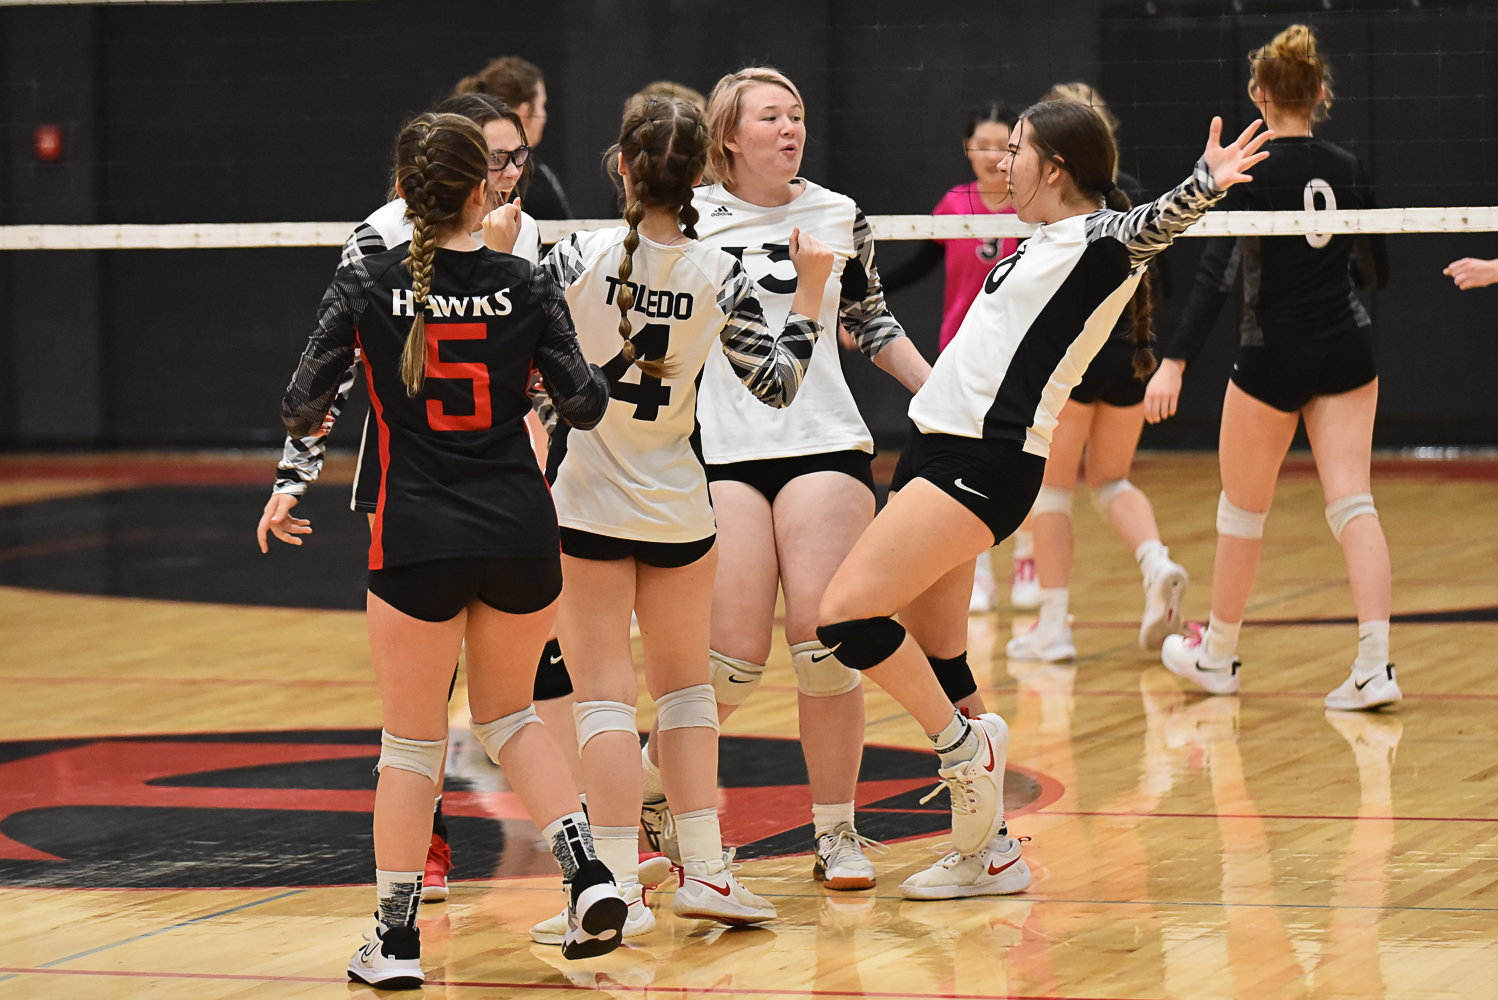 Toledo celebrates a point during its match against Napavine at home on Oct. 24.